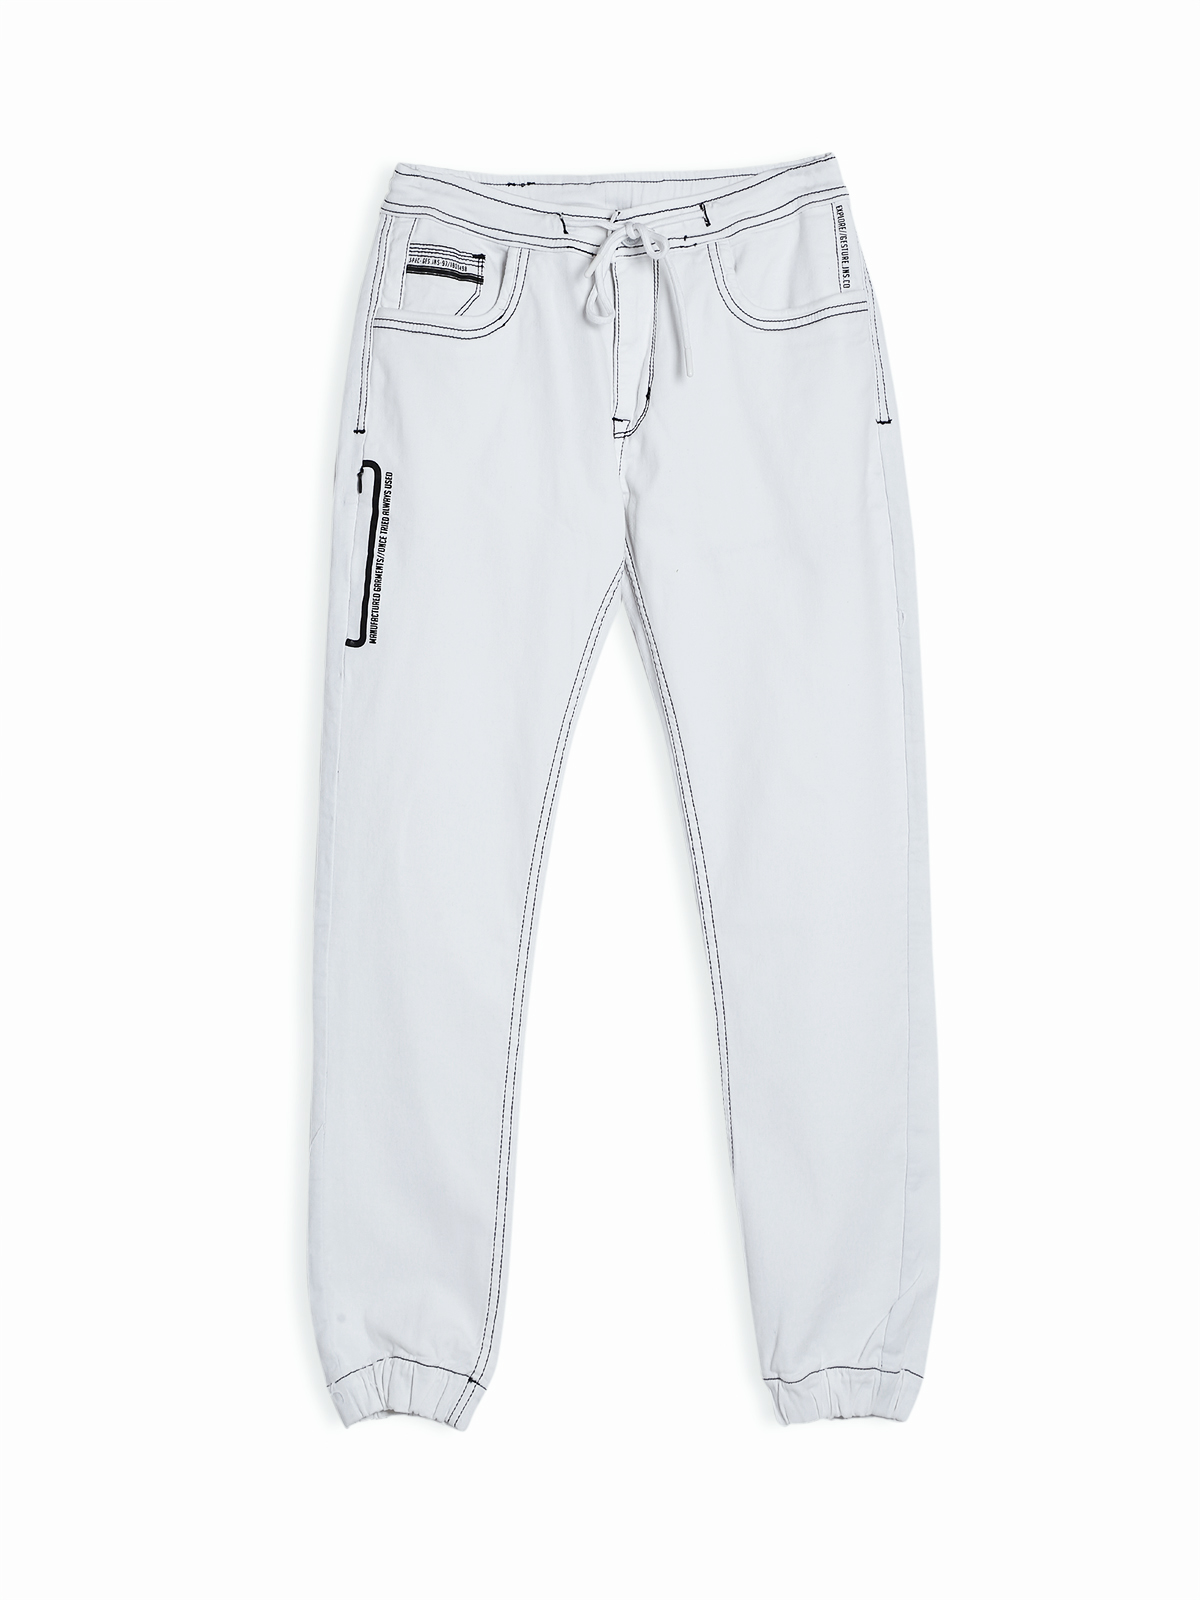 Joggers For Girls - Buy Joggers For Girls online at Best Prices in India |  Flipkart.com